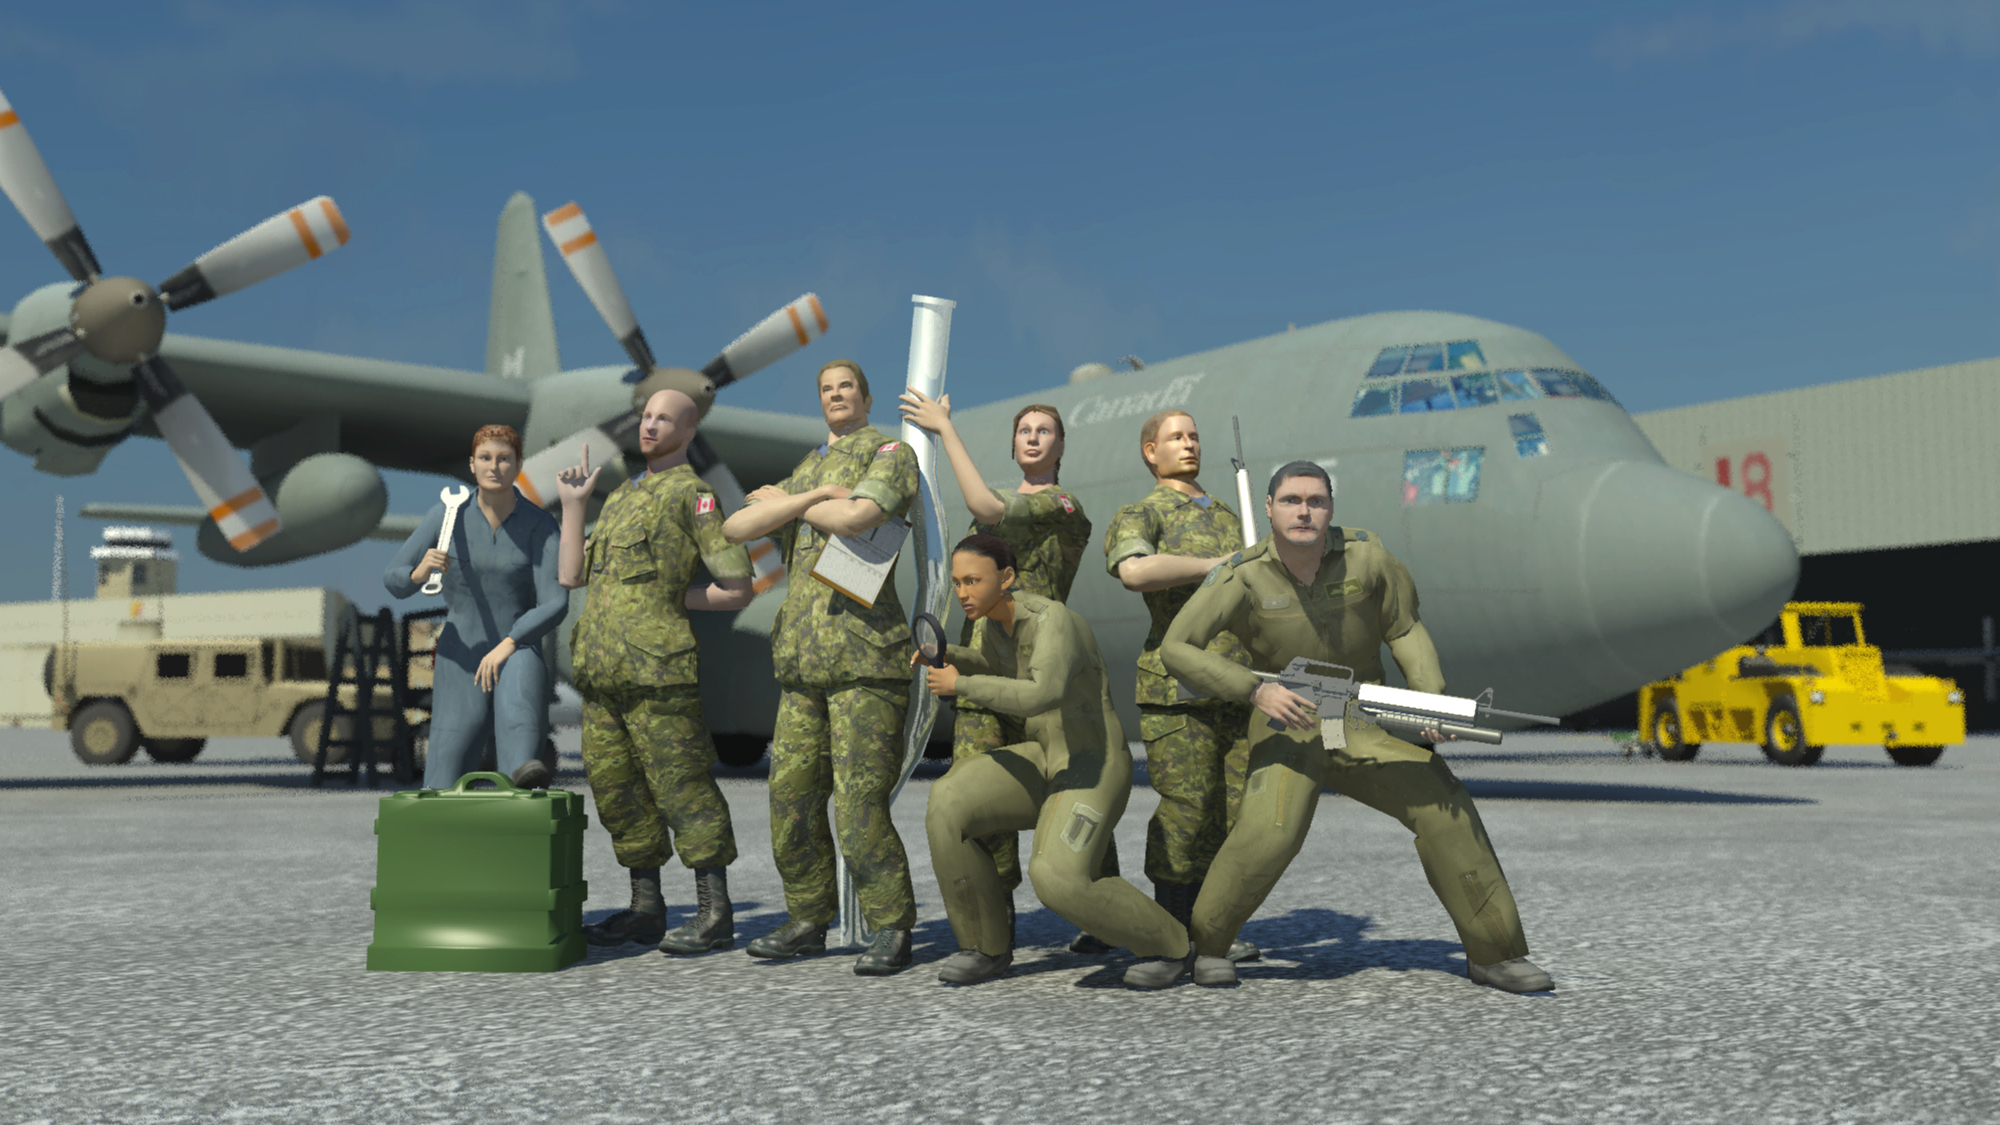 Air force gamification: From experimentation to widespread adoption